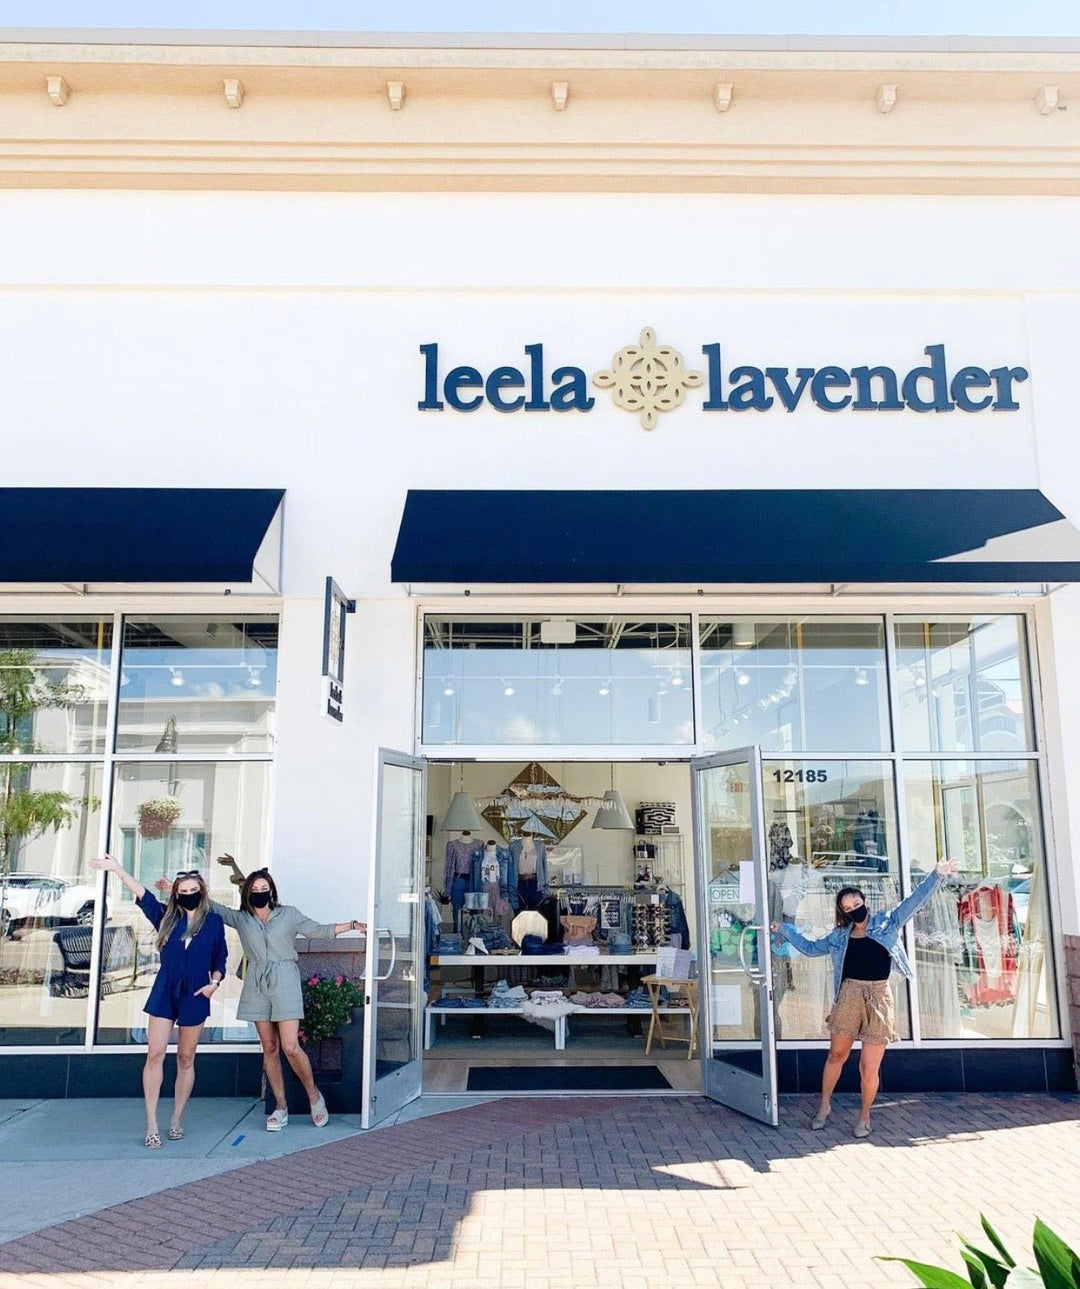 Leela and Lavender's 2020 In Review - Leela and Lavender